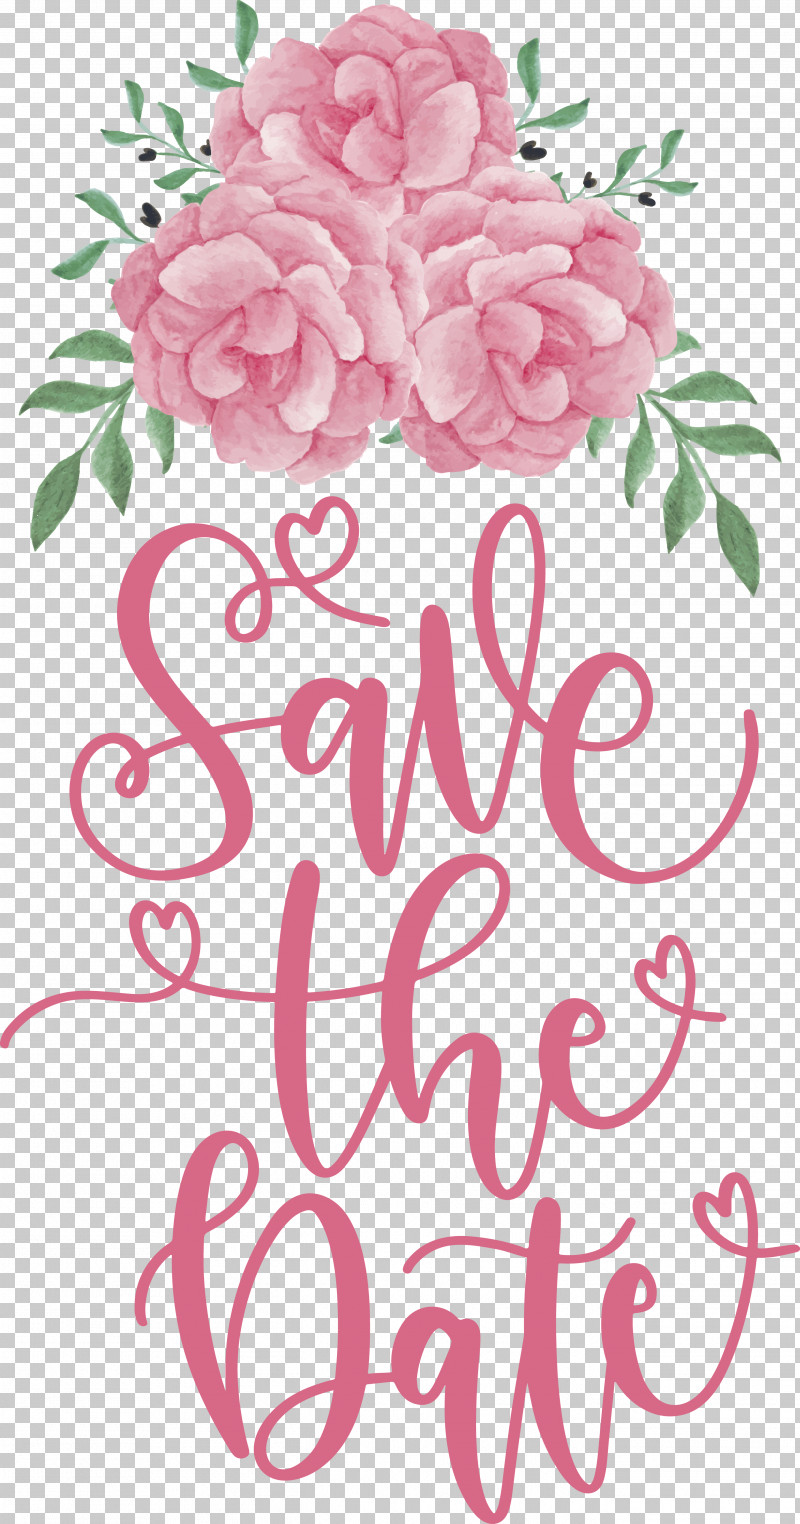 Save The Date PNG, Clipart, Floral Design, Pdf, Save The Date, Wedding, Wedding Invitation Free PNG Download